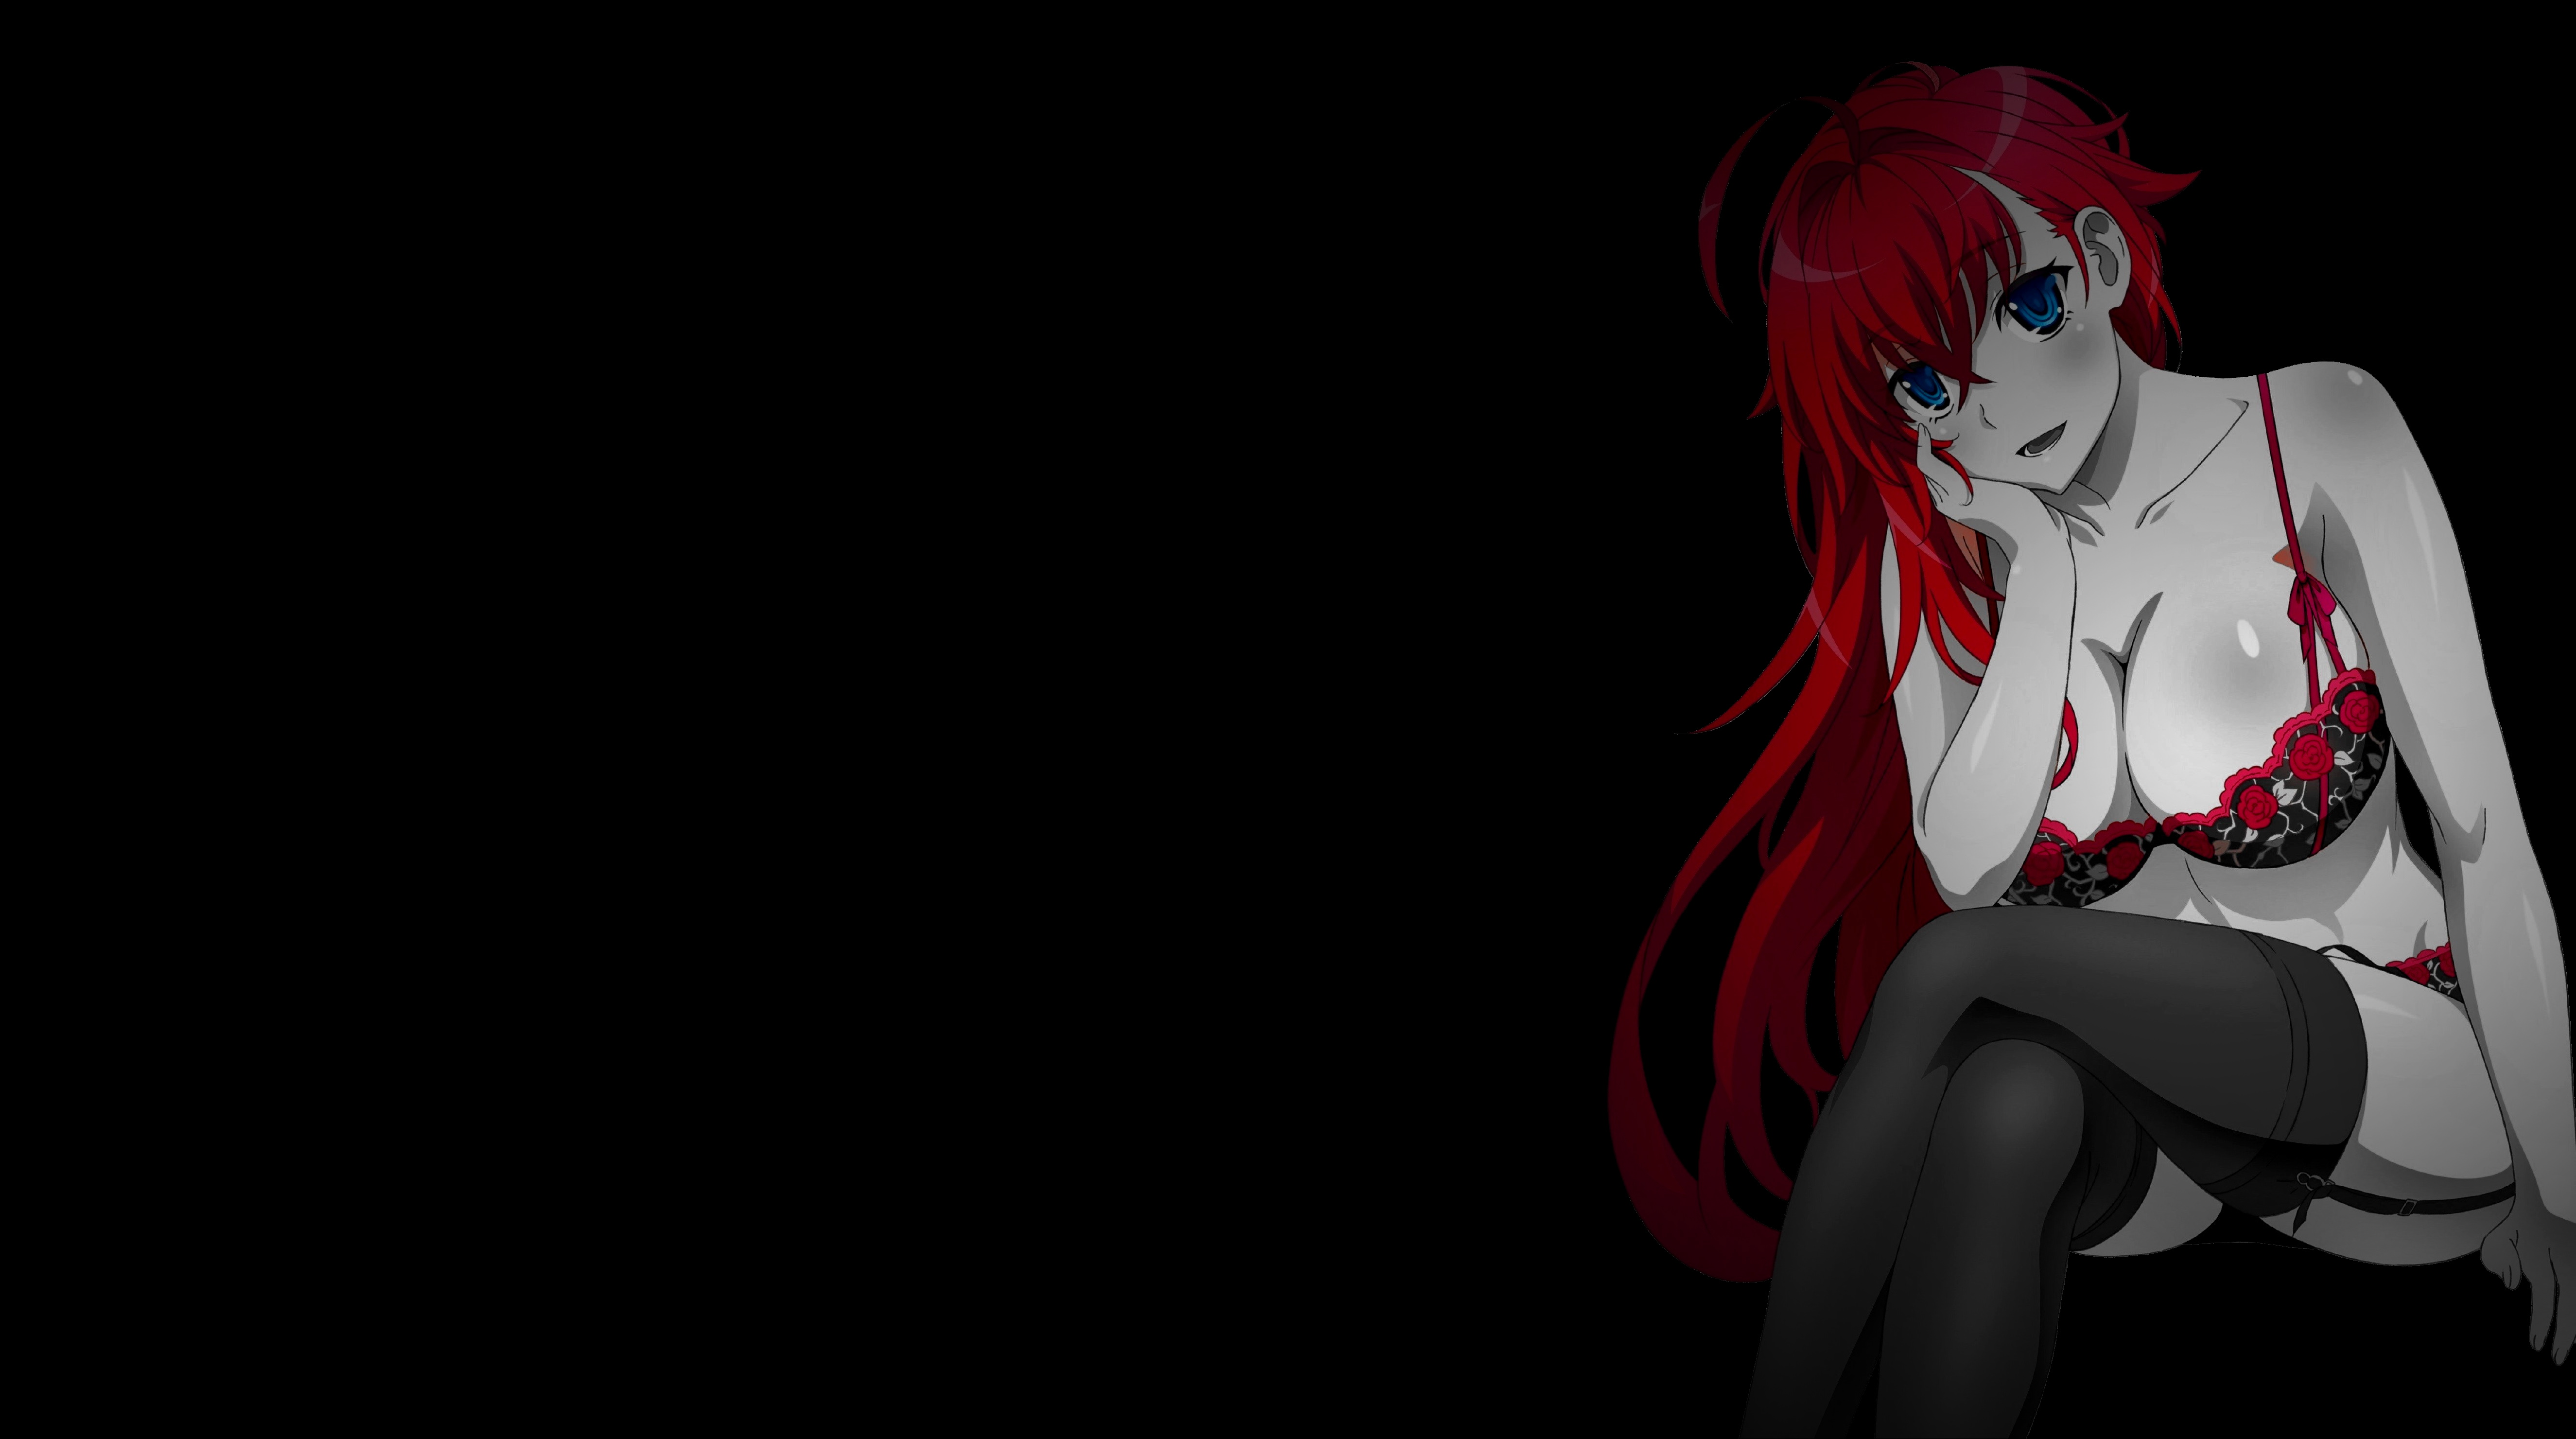 Anime 5300x2960 black background dark background simple background anime girls selective coloring cleavage big boobs underwear stockings garter belt Gremory Rias High School DxD